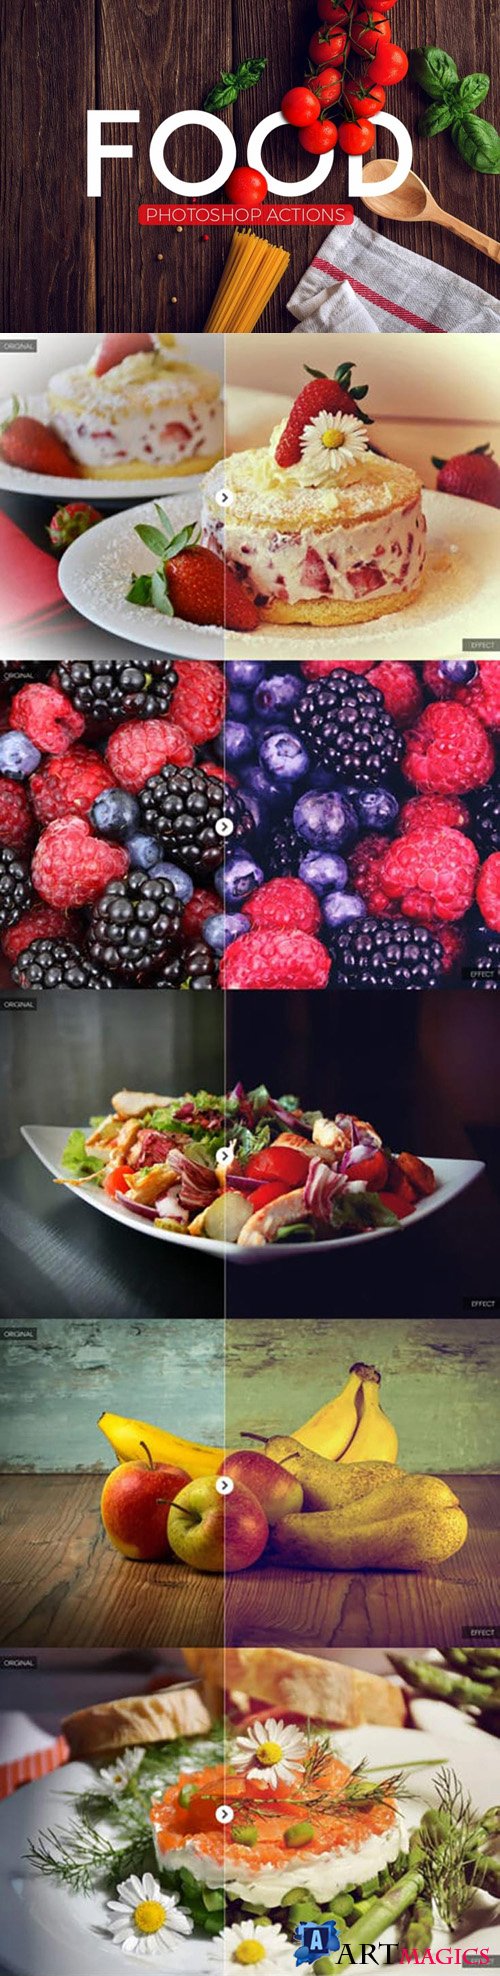 Photoshop Actions for Food Photography Vol.3